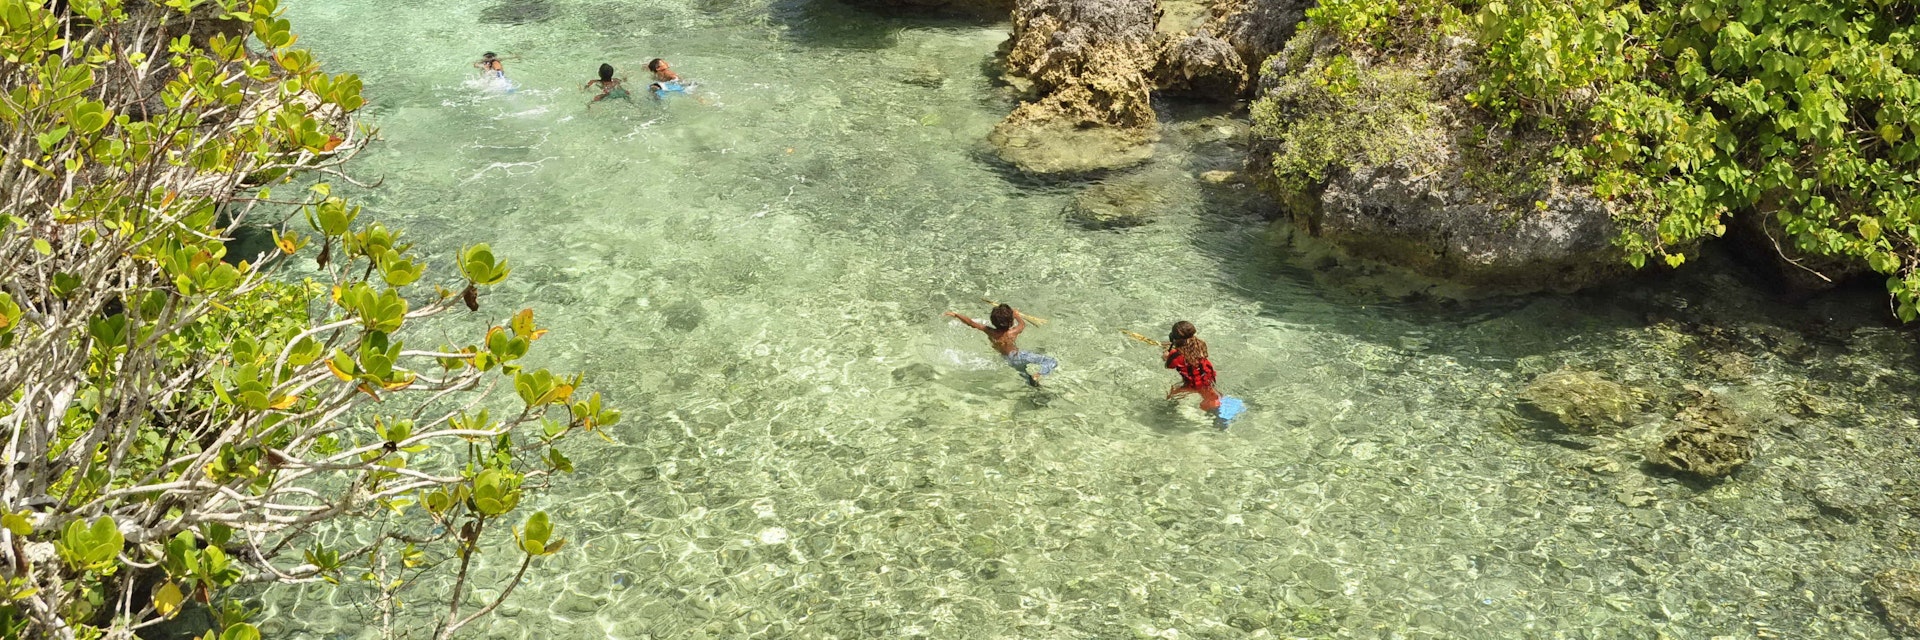 People swimming in a lagoon on Mare Island in New Caledonia.